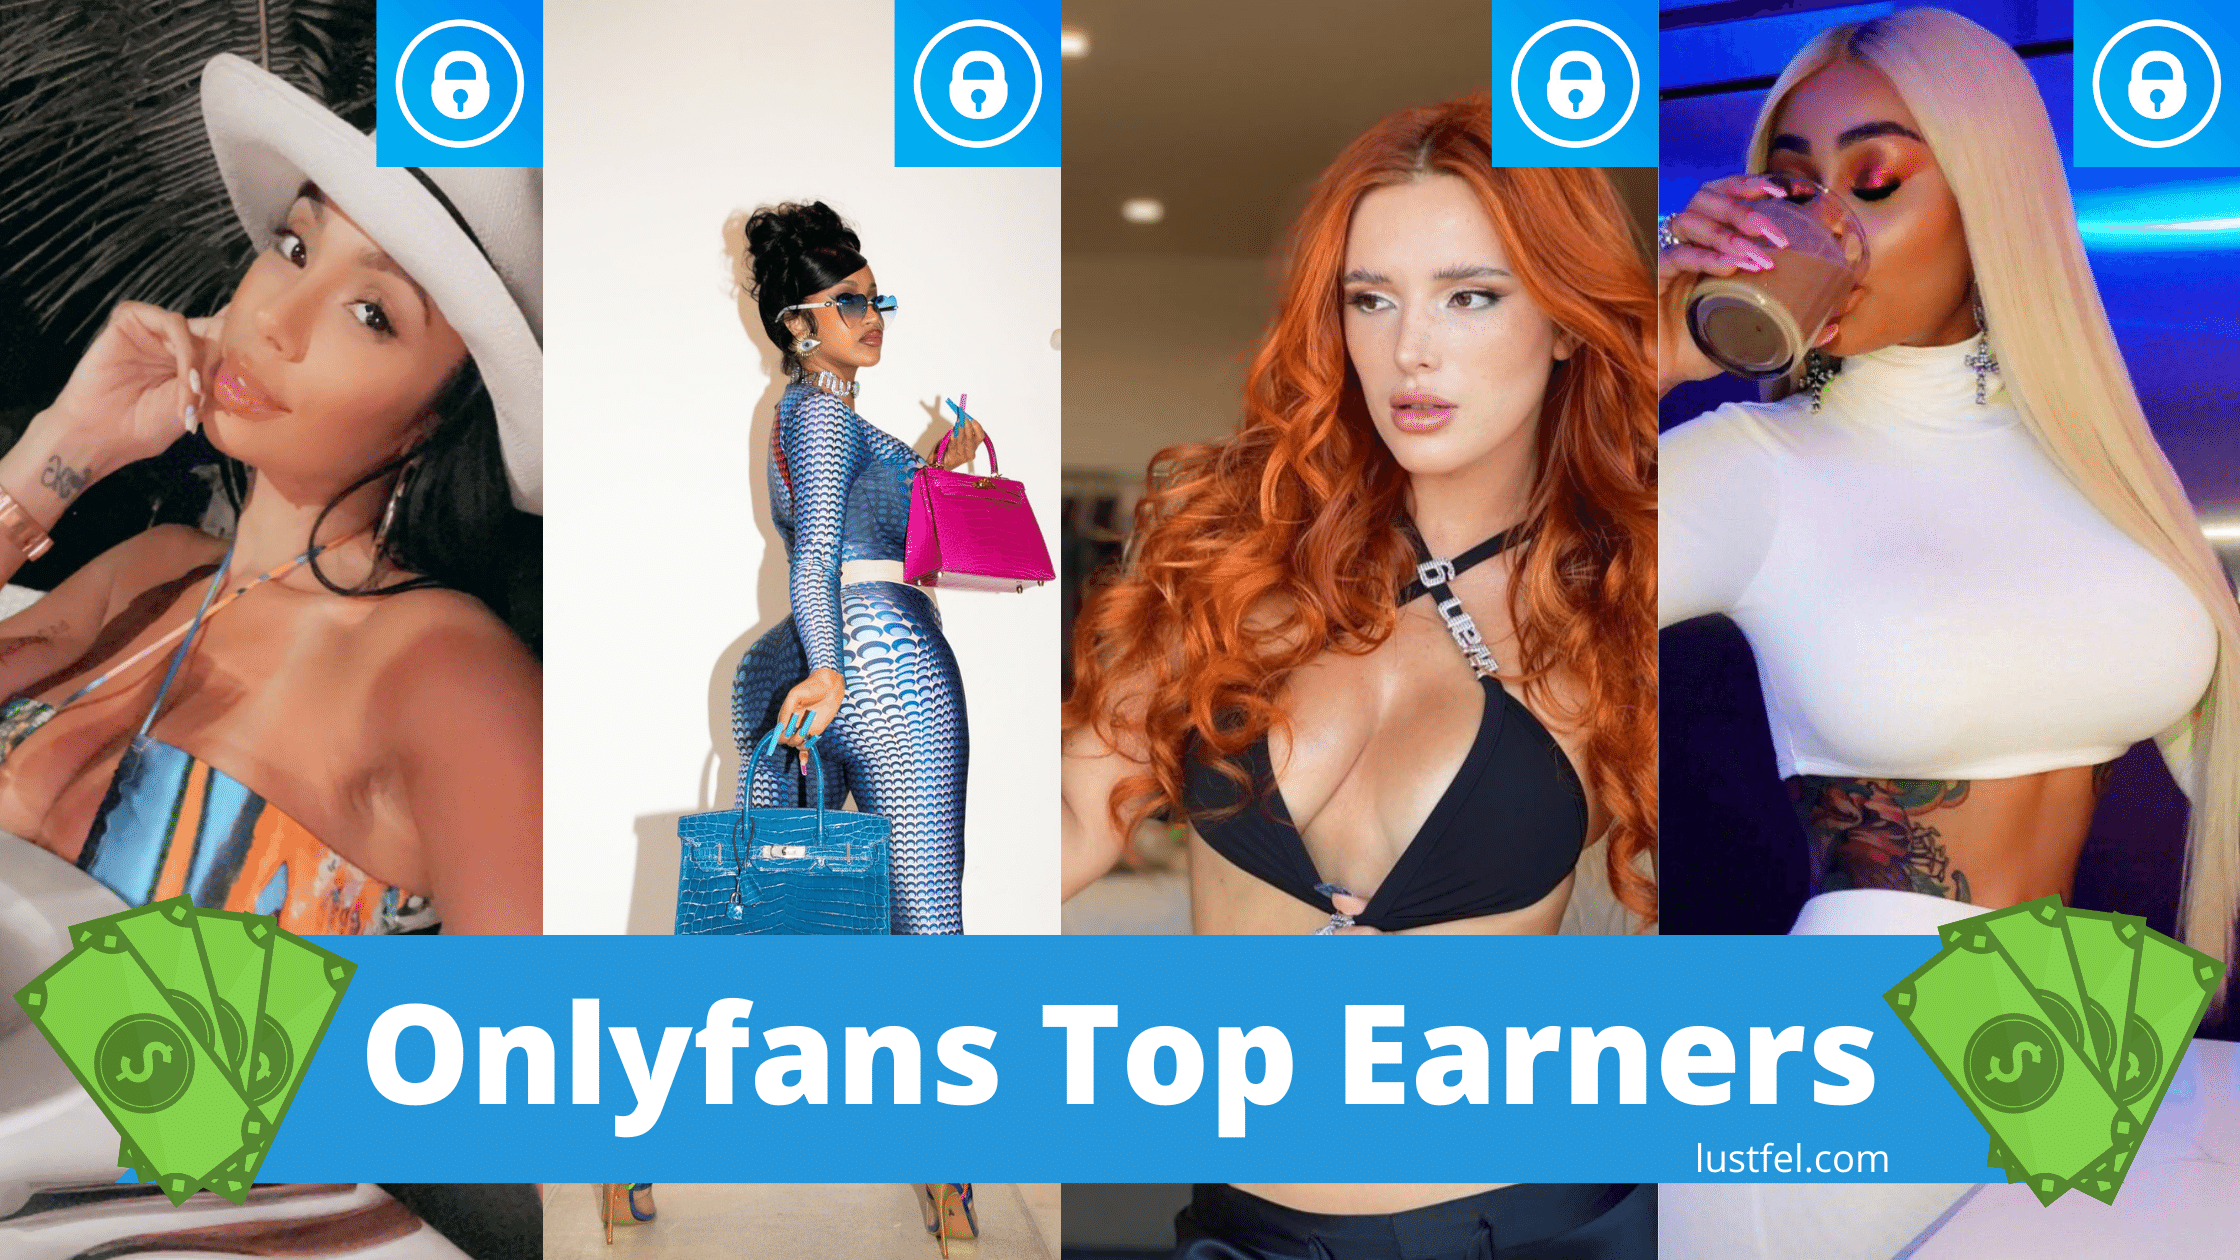 Top 100 Onlyfans Earners Chart 2021